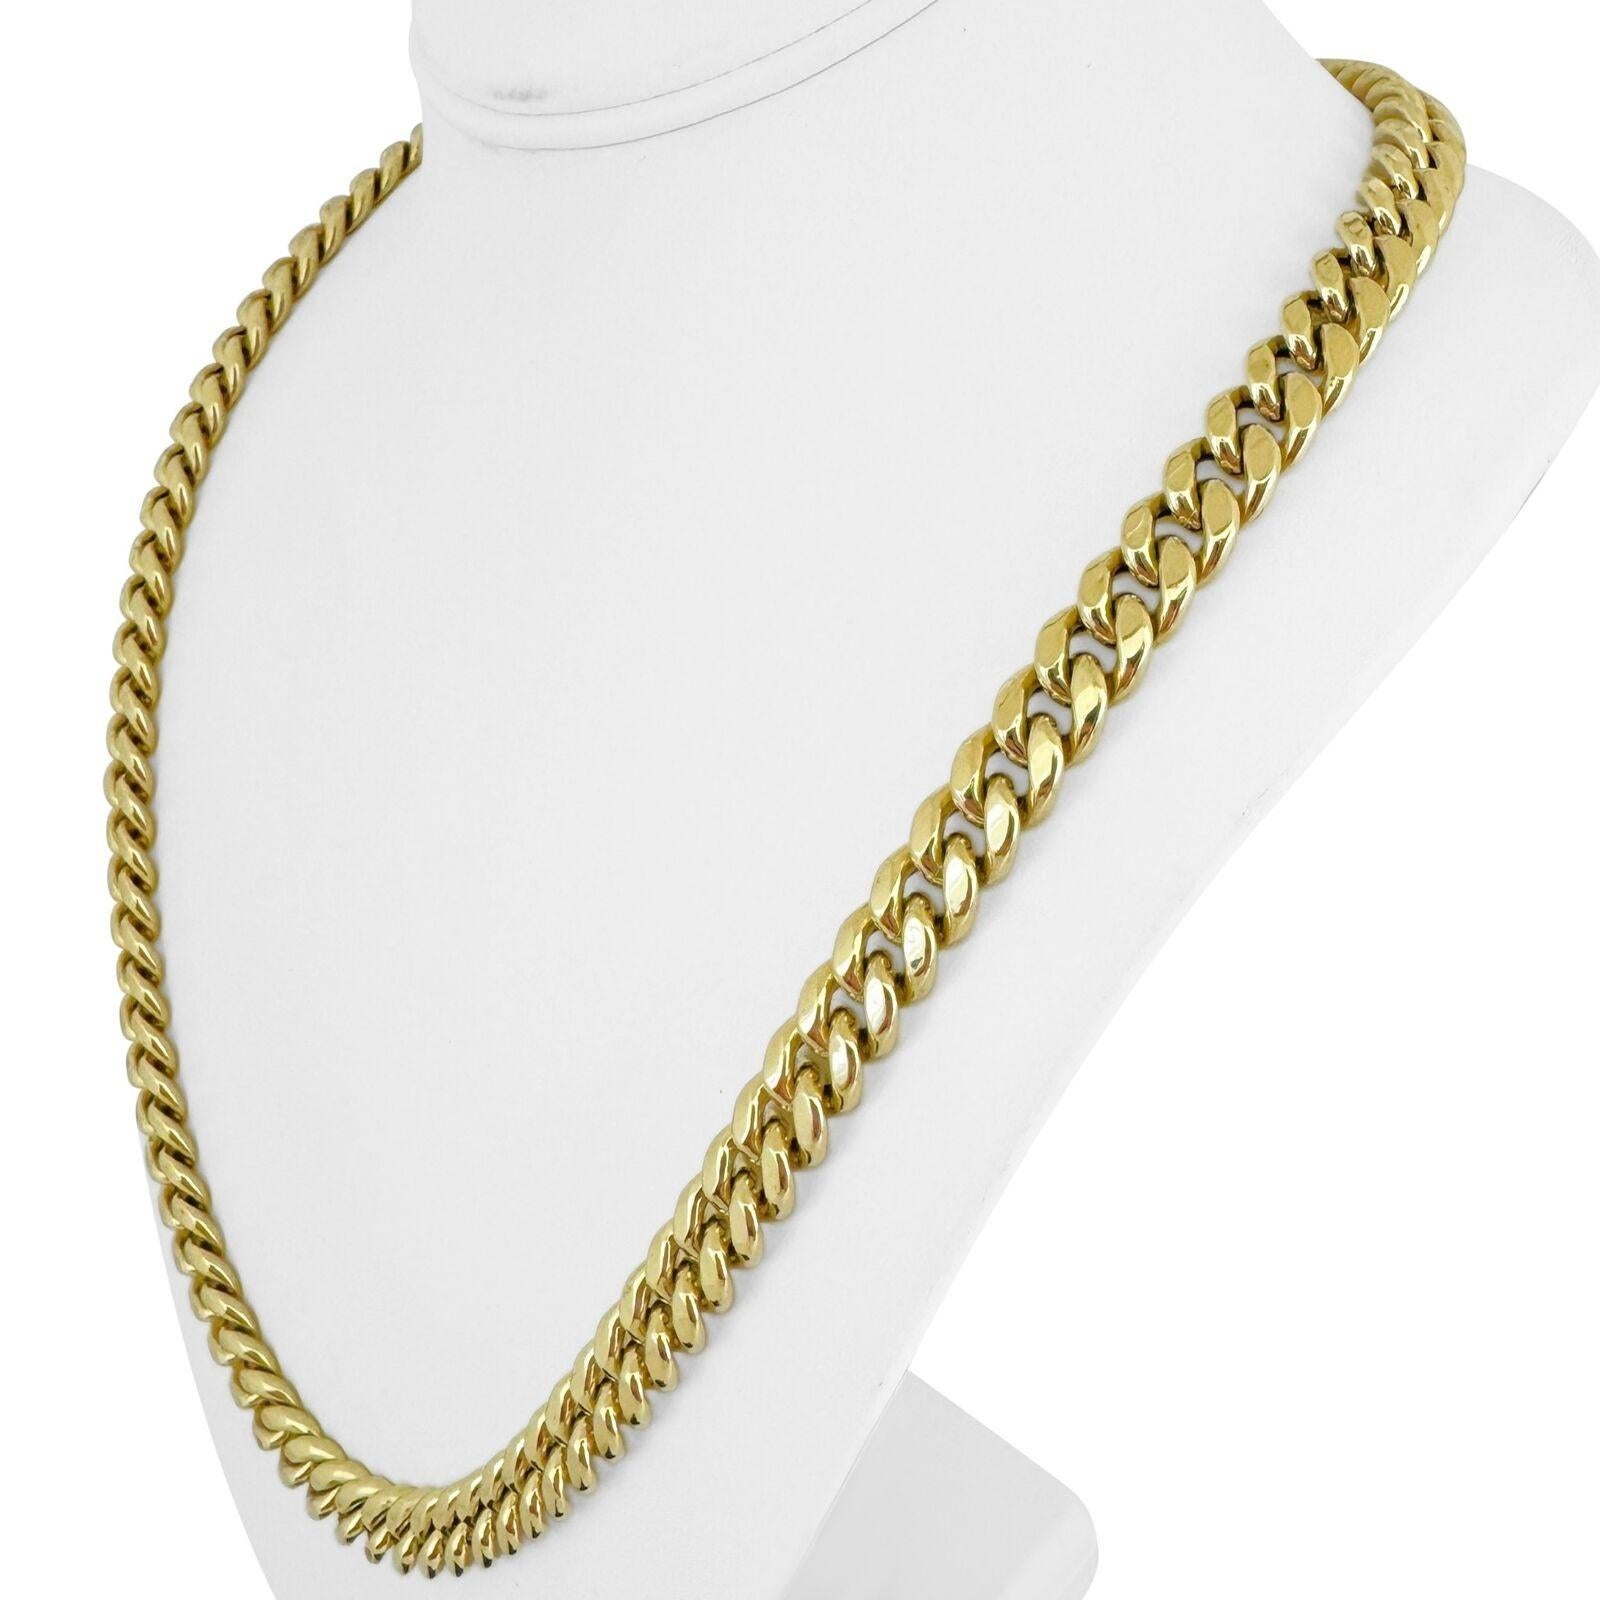 10k Yellow Gold 54.8g Hollow Polished 9mm Cuban Link Chain Necklace 24